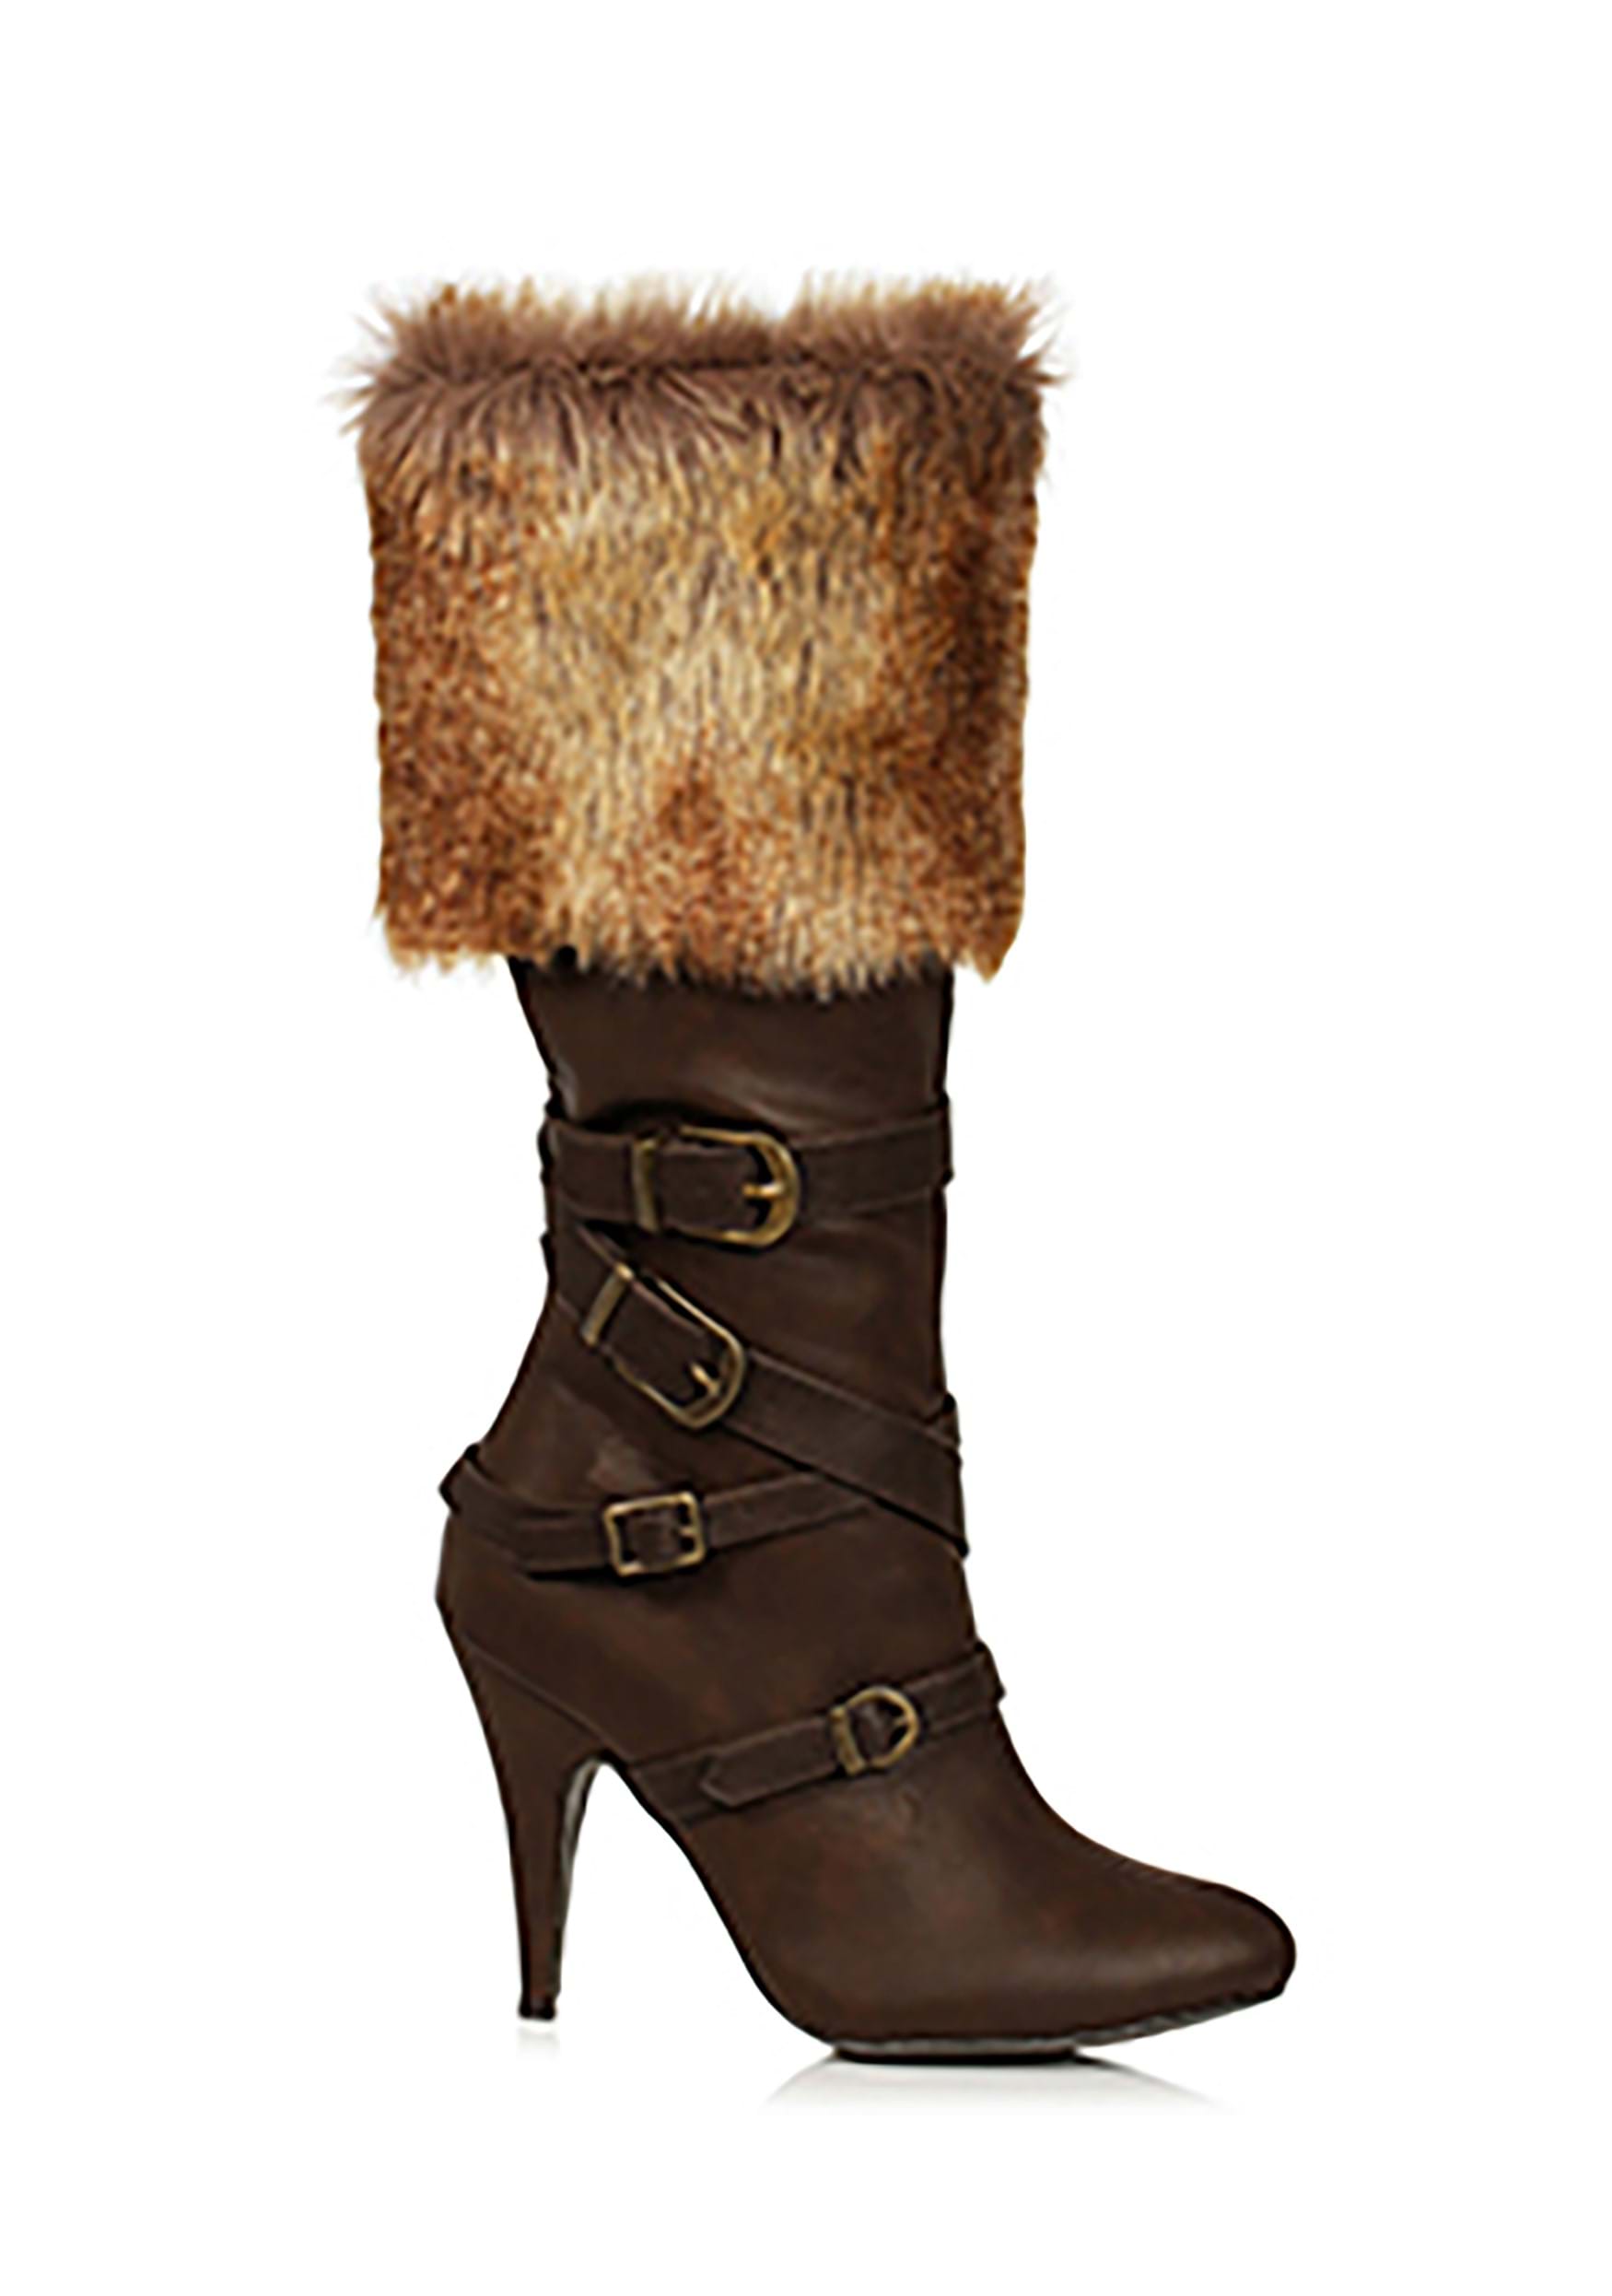 Image of Fur Trimmed Women's Viking Boots ID EE417GRETABR-9